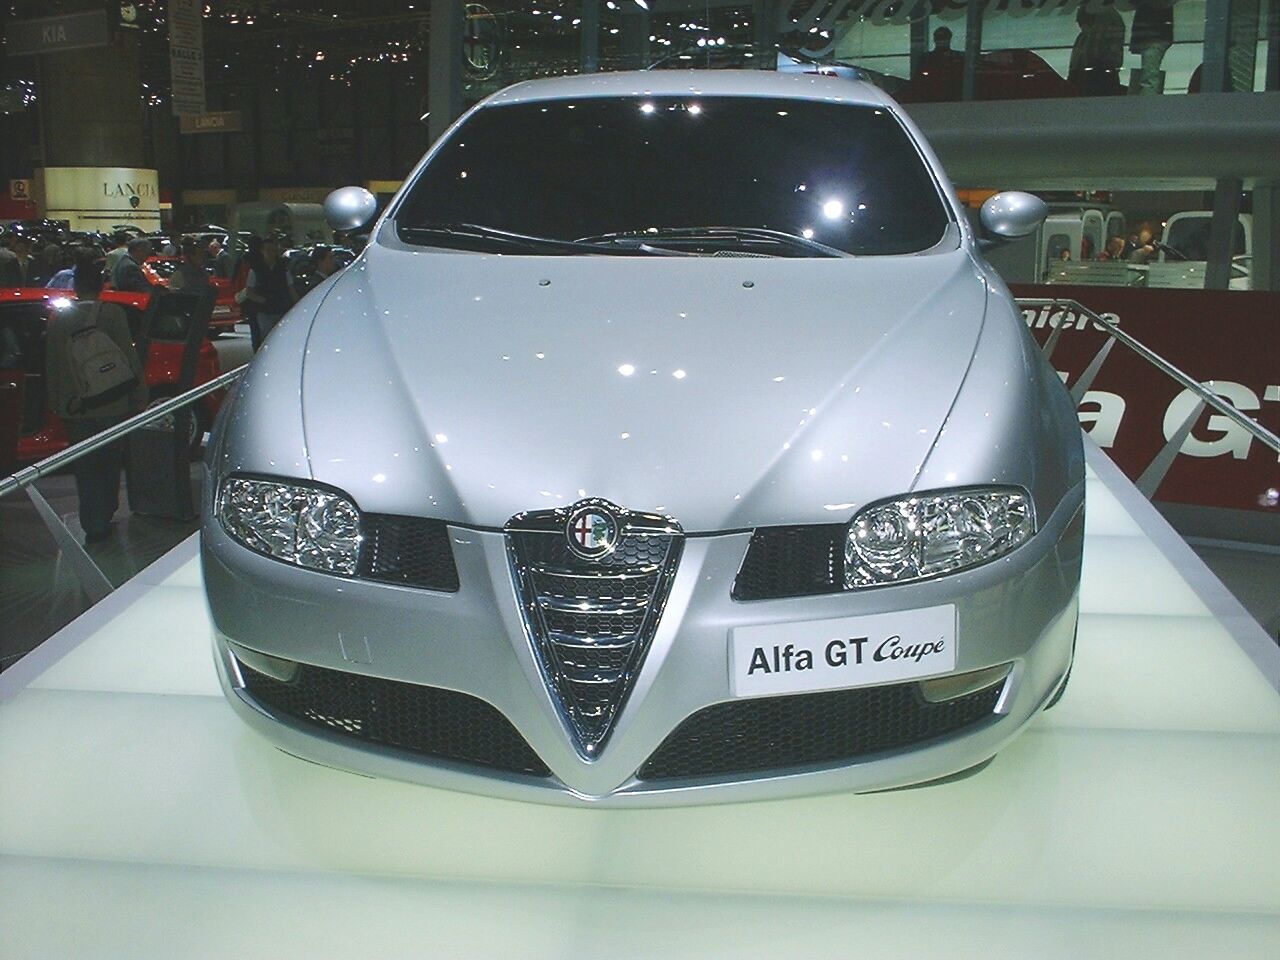 the new Alfa Romeo Coupe GT received its world premiere at the Geneva Motor Show this week